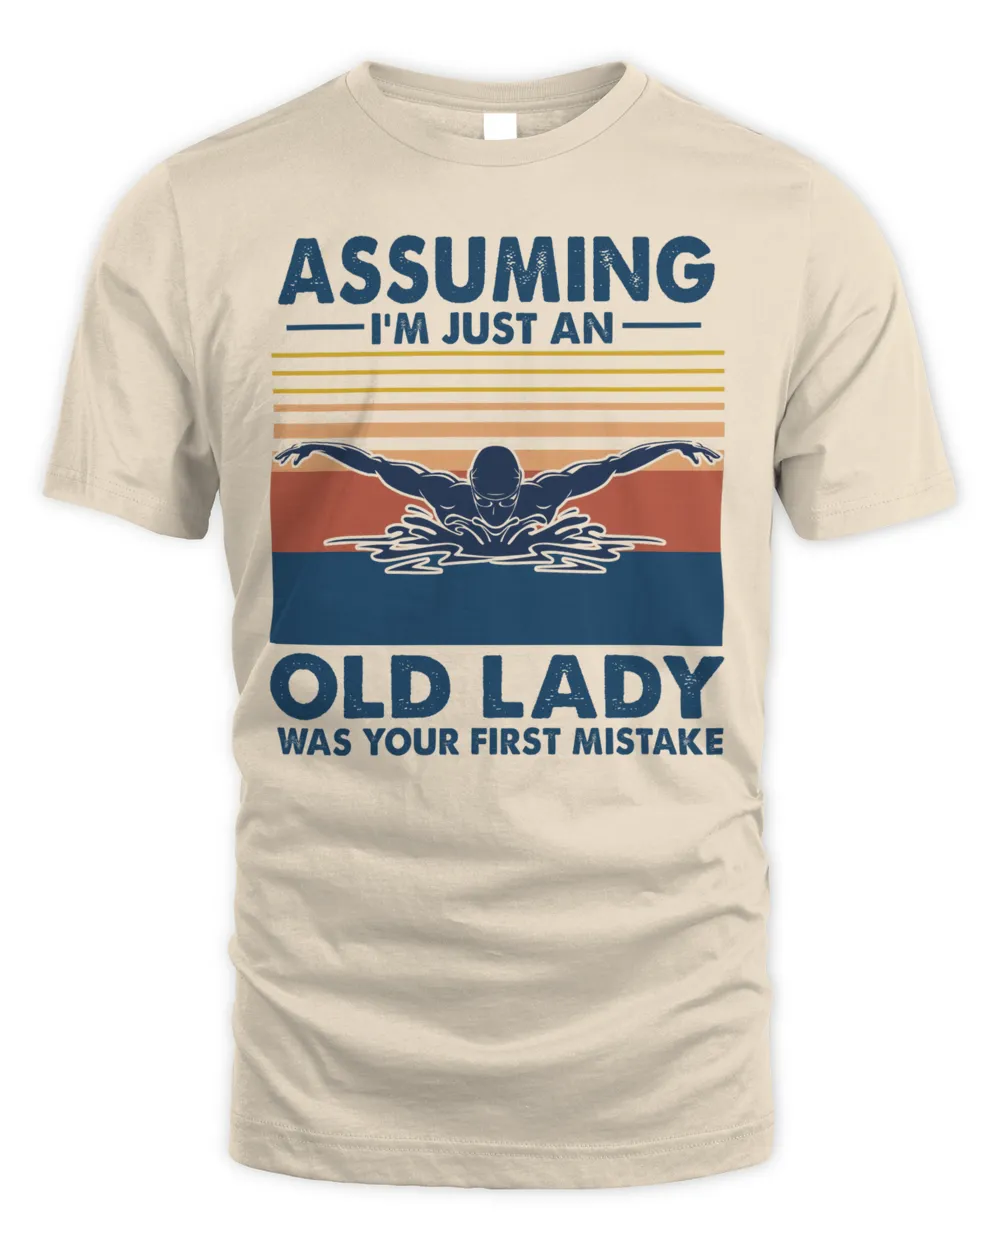 Assuming I'm just an old lady